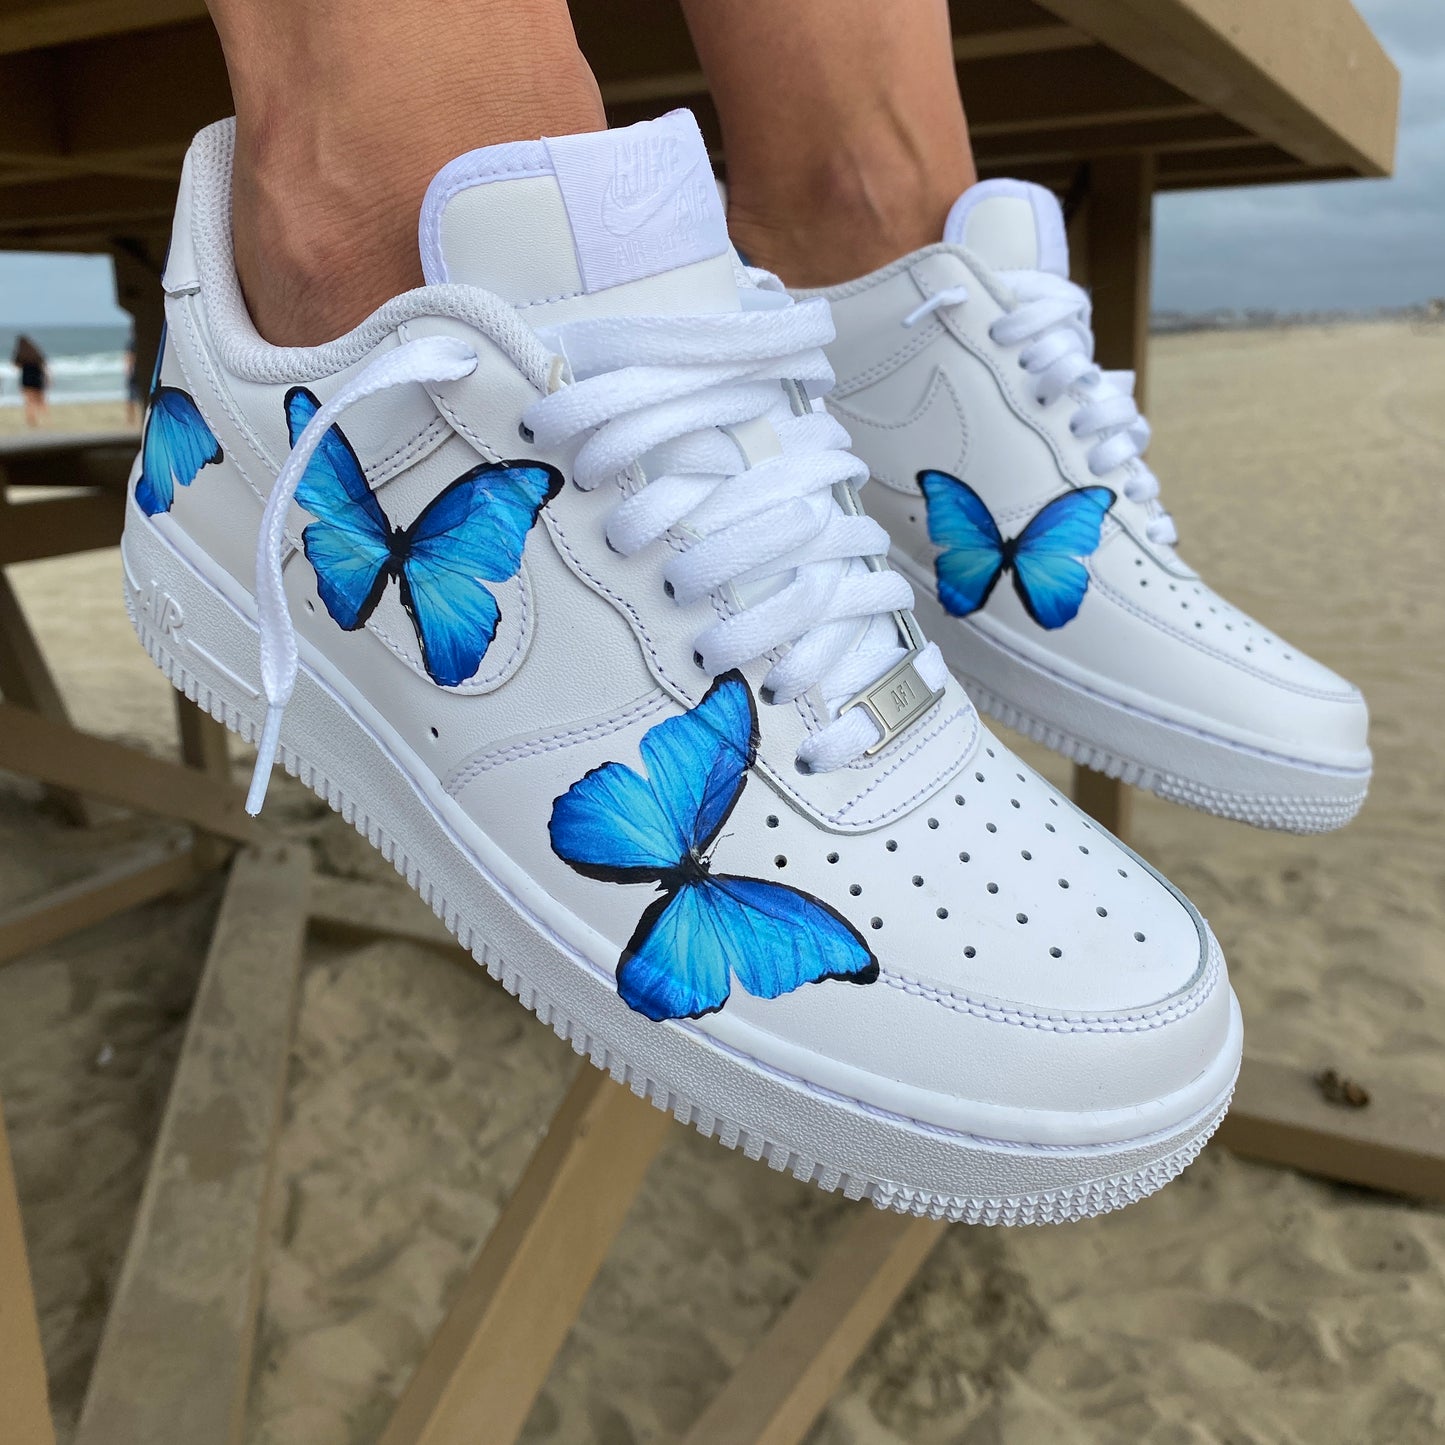 Sneakers  Womens Air Force 1 Butterfly Custom Shoes AF1 Handmade